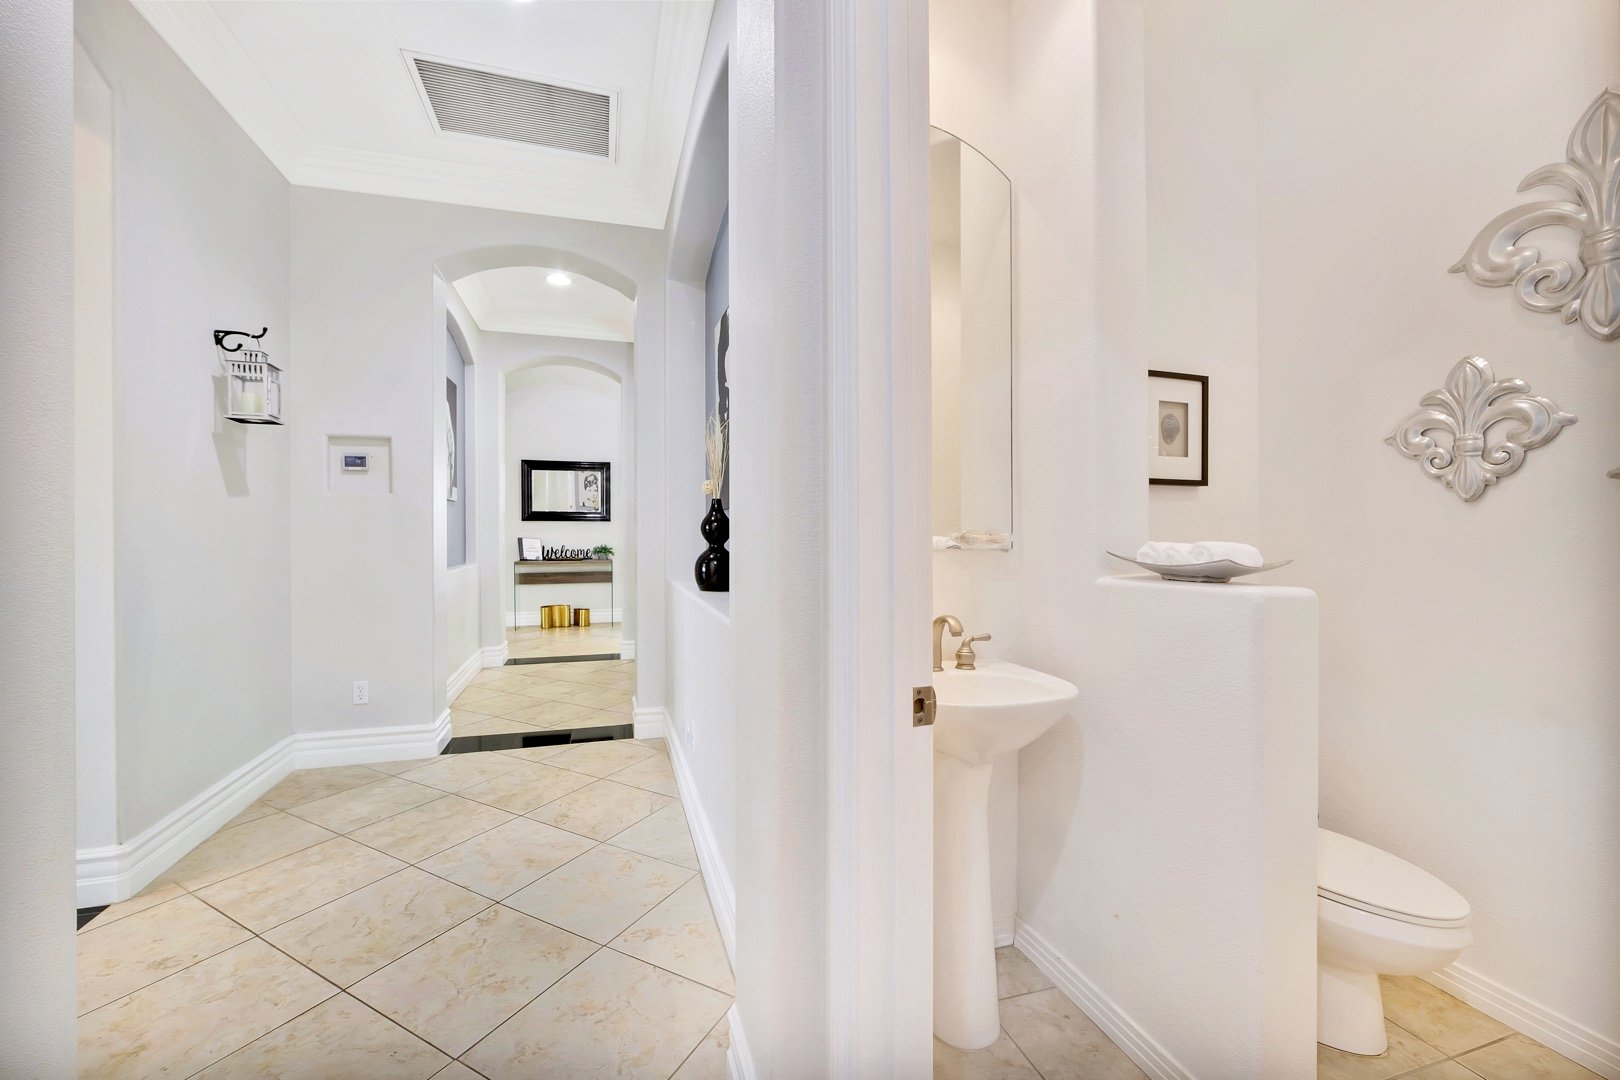 The powder room is conveniently located in the main hallway for your visiting guests to use.